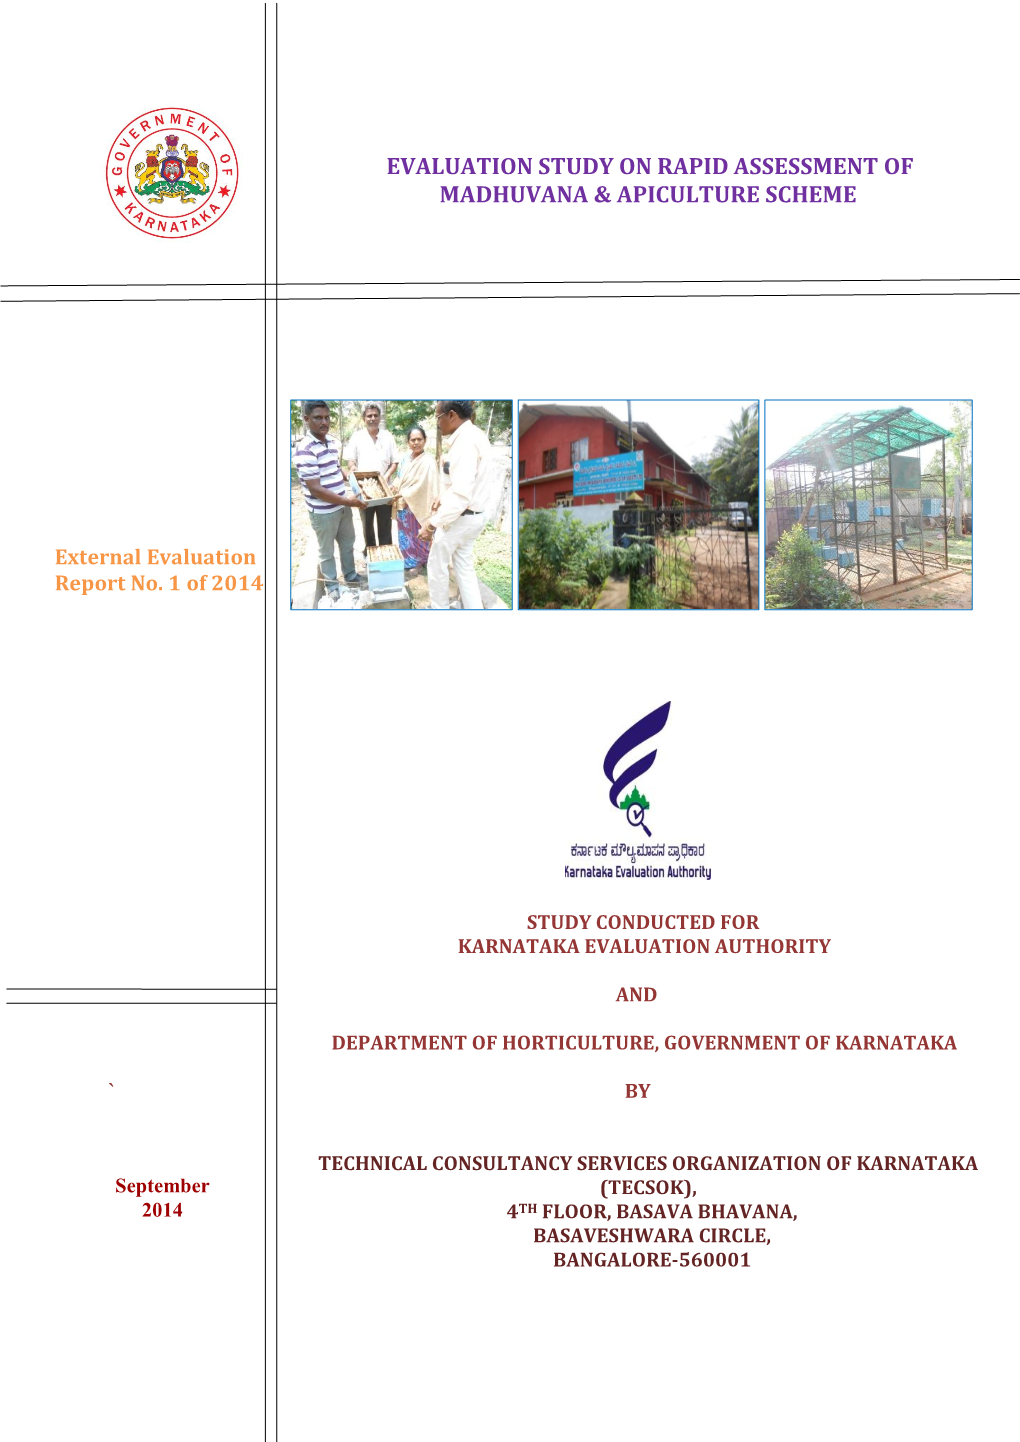 Evaluation Study on Rapid Assessment of Madhuvana & Apiculture Scheme